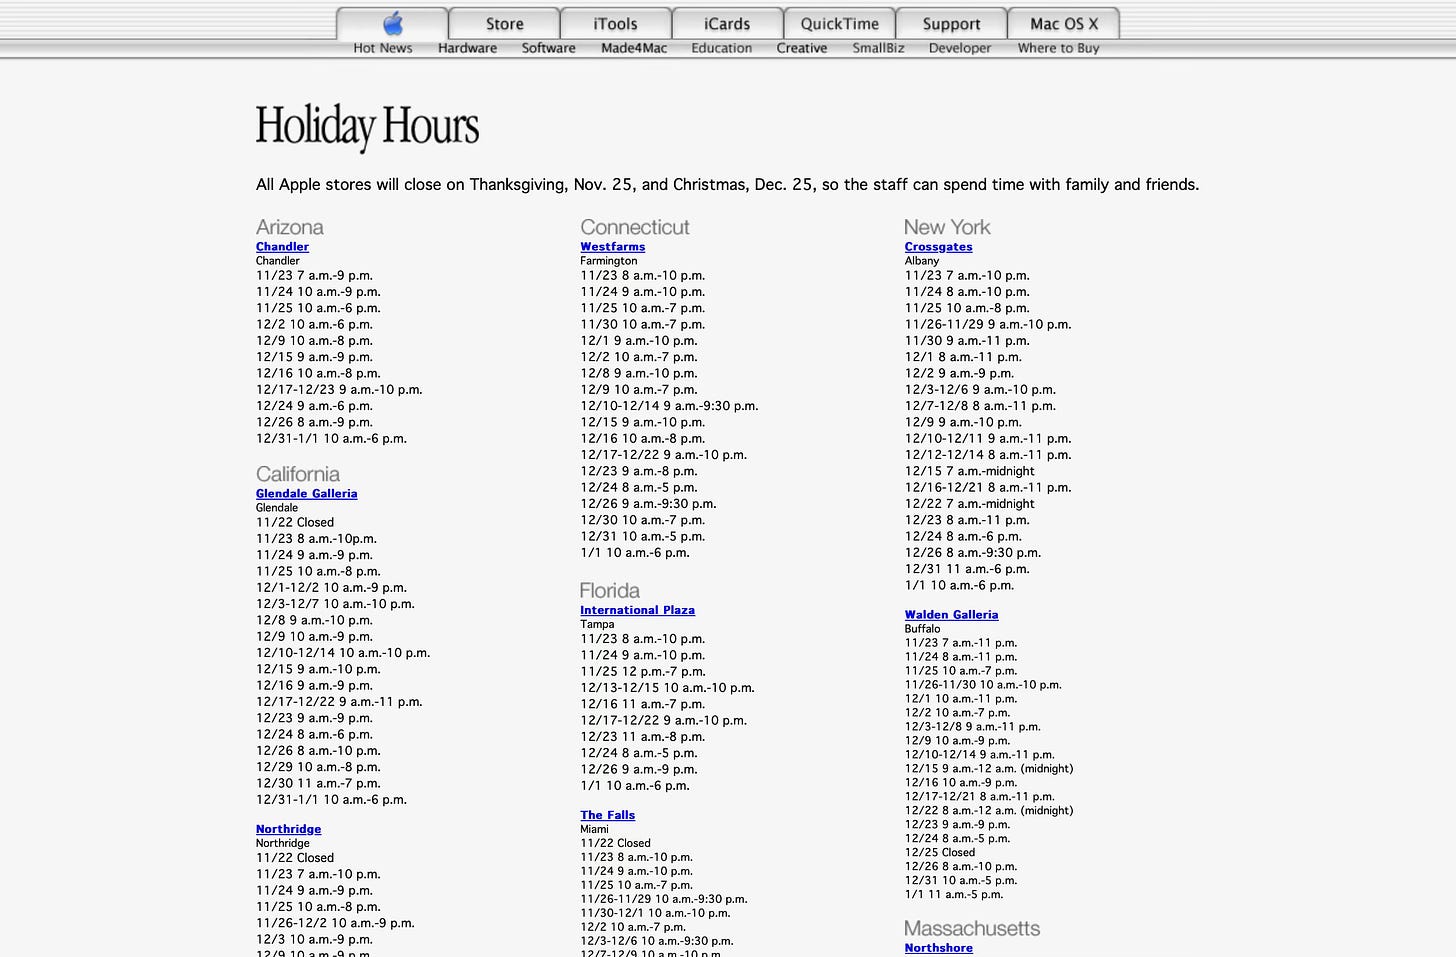 A screenshot of Apple.com's Holiday Hours page in 2001.